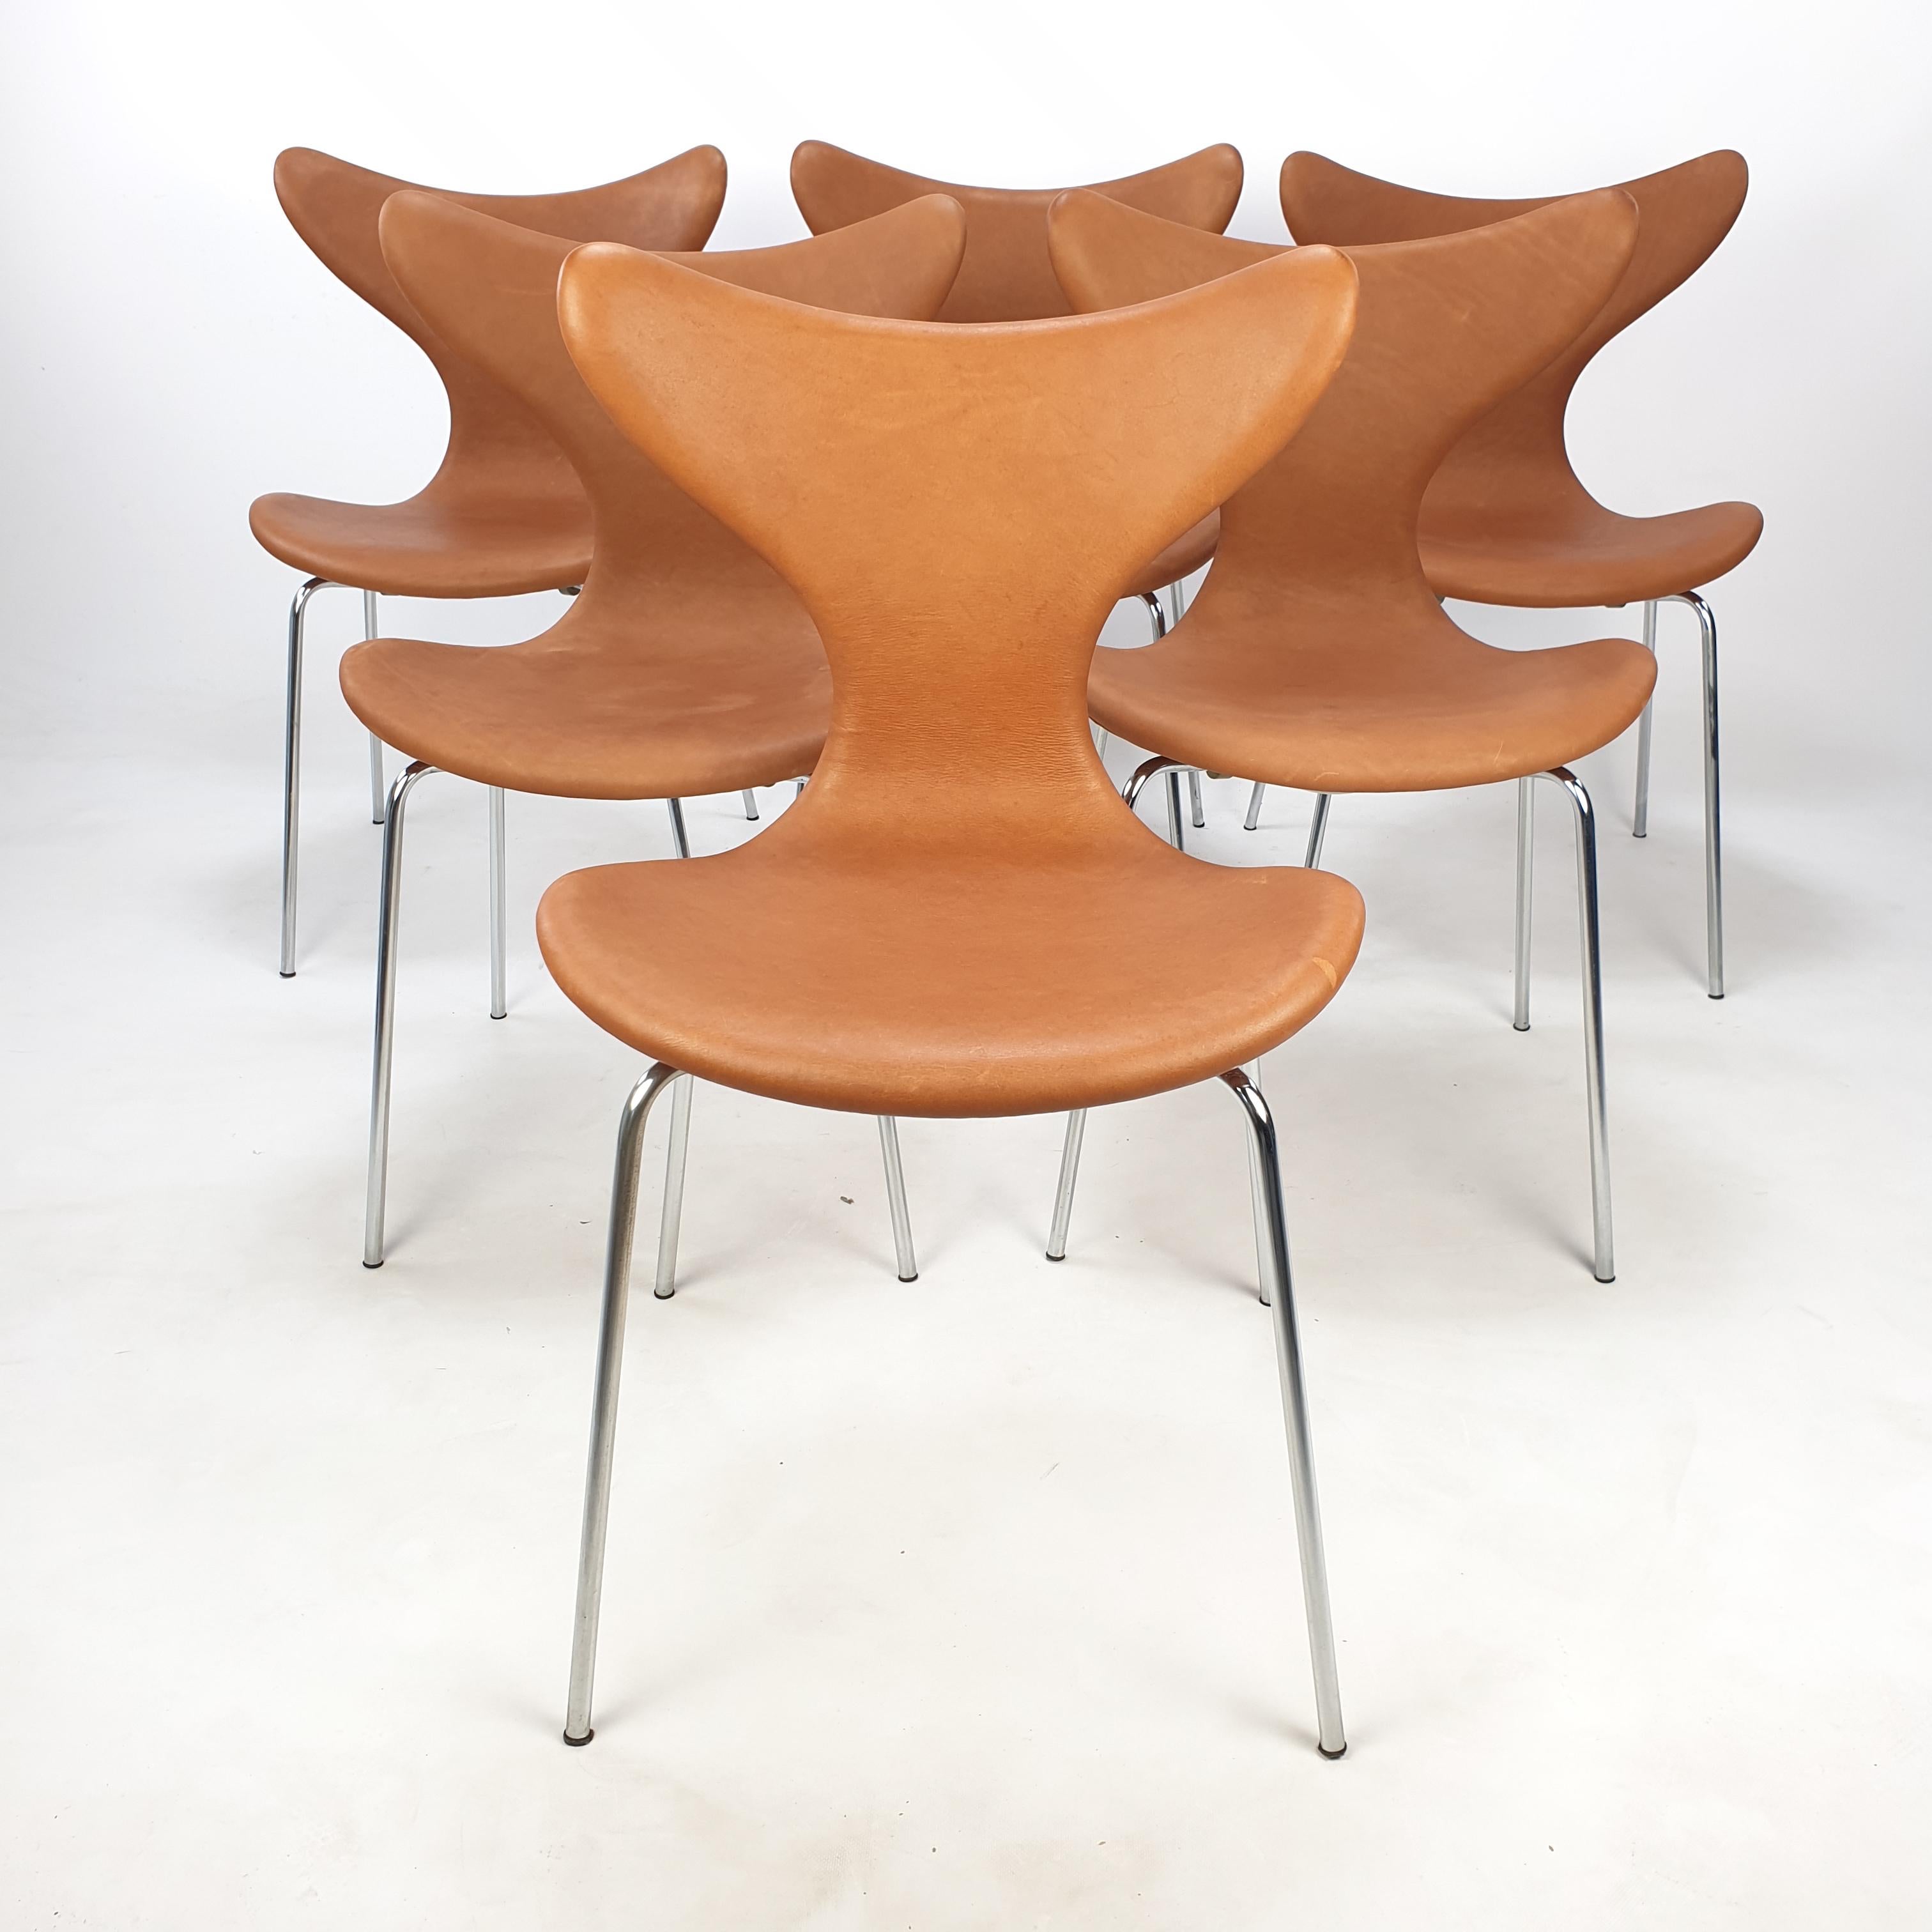 Rare set with 6 original Arne Jacobsen armchairs named and known as 